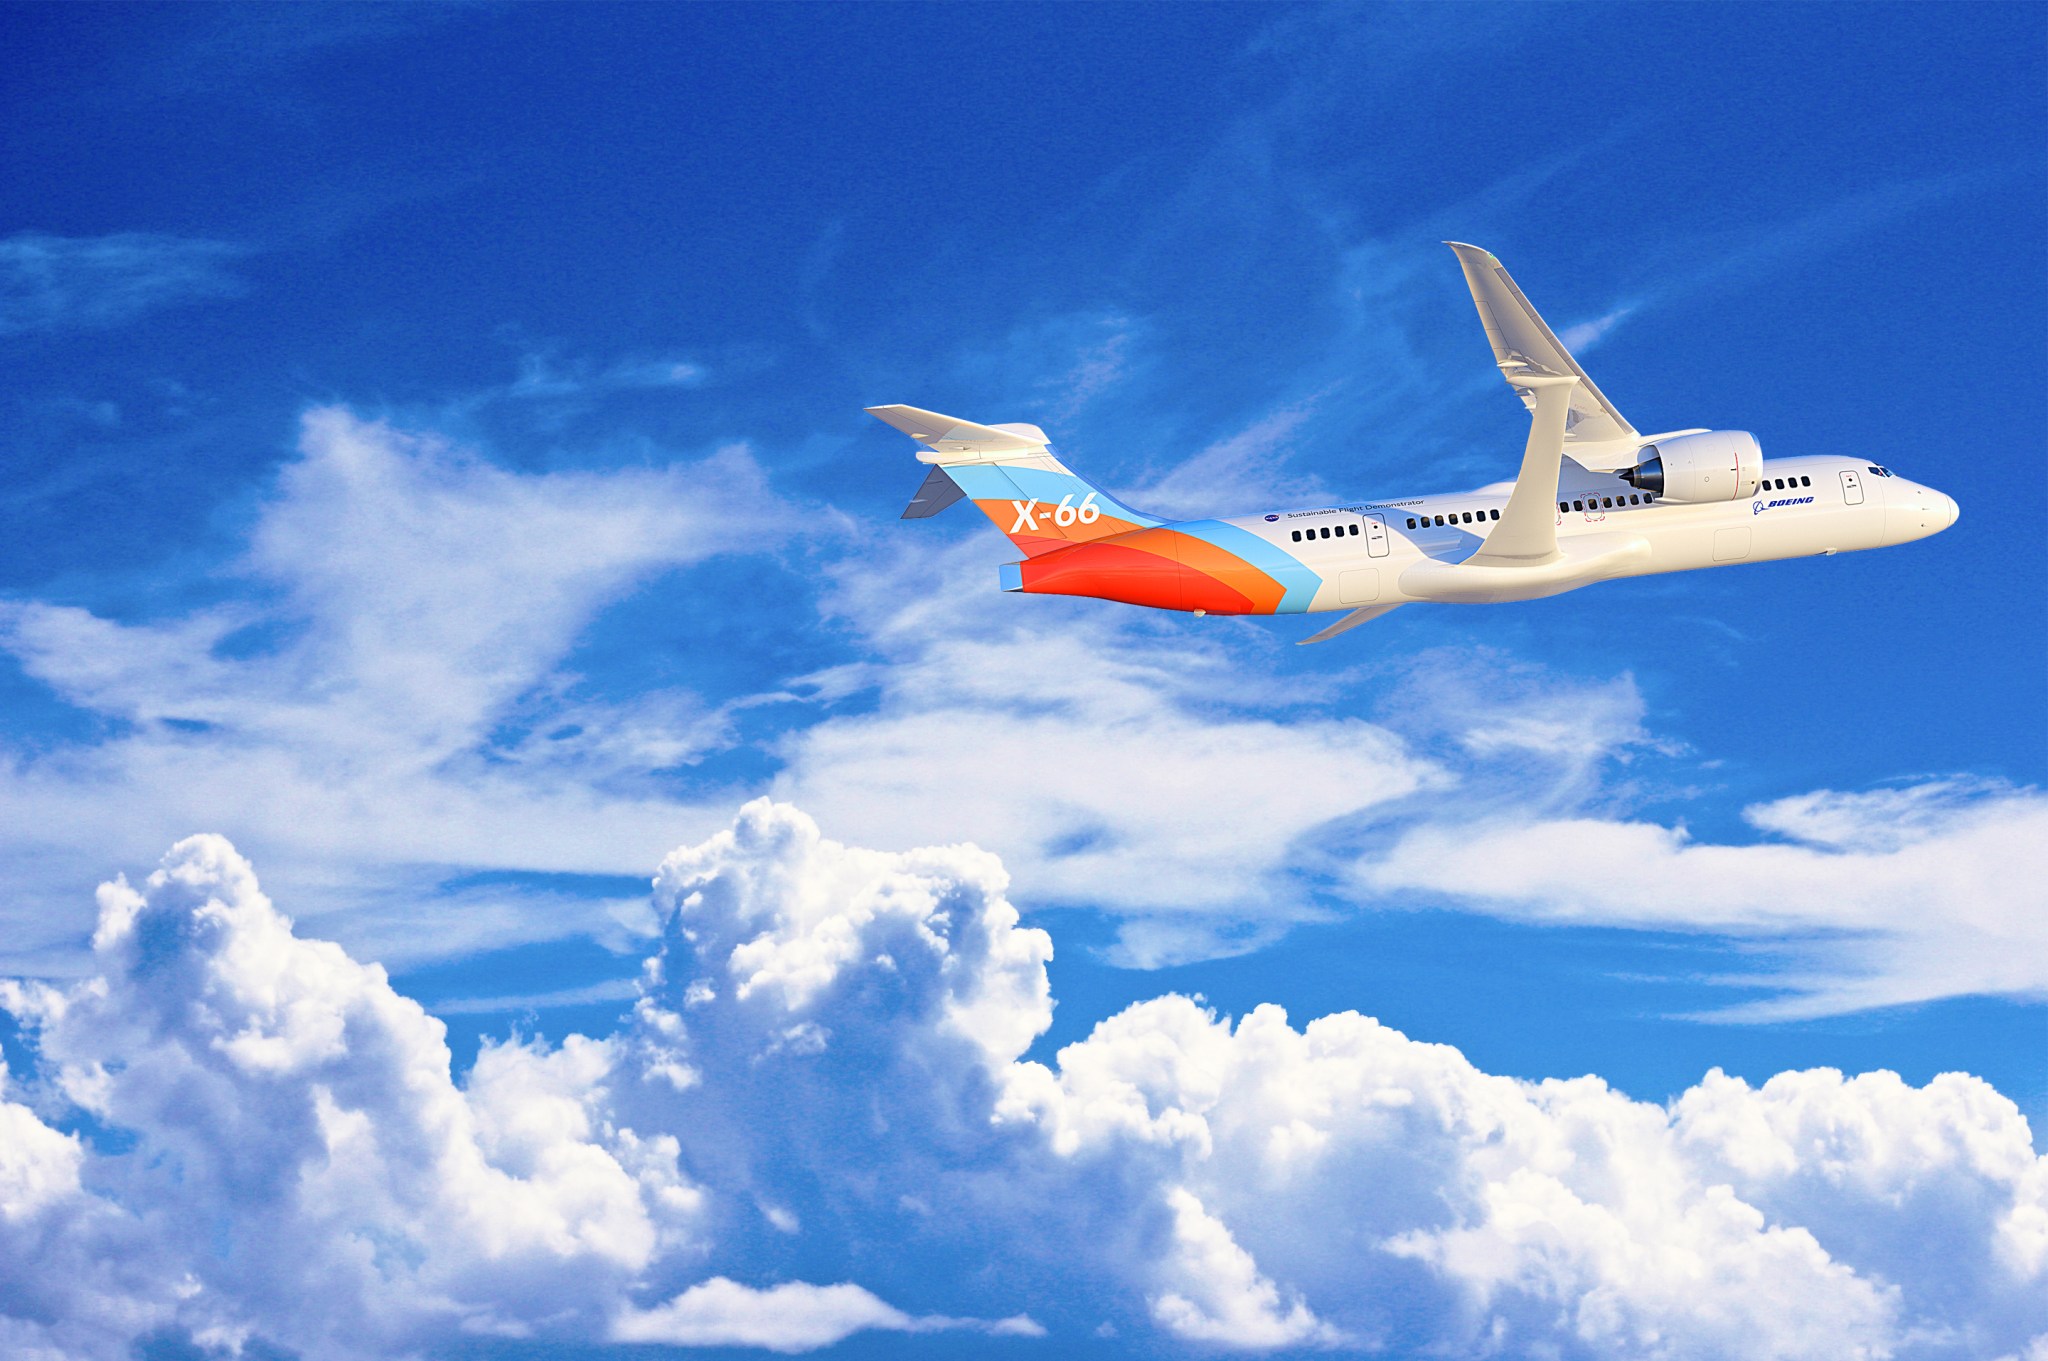 Artist concept shows a mid-sized airliner with a long, skinny wing held up by braces flying through a cloudy sky.